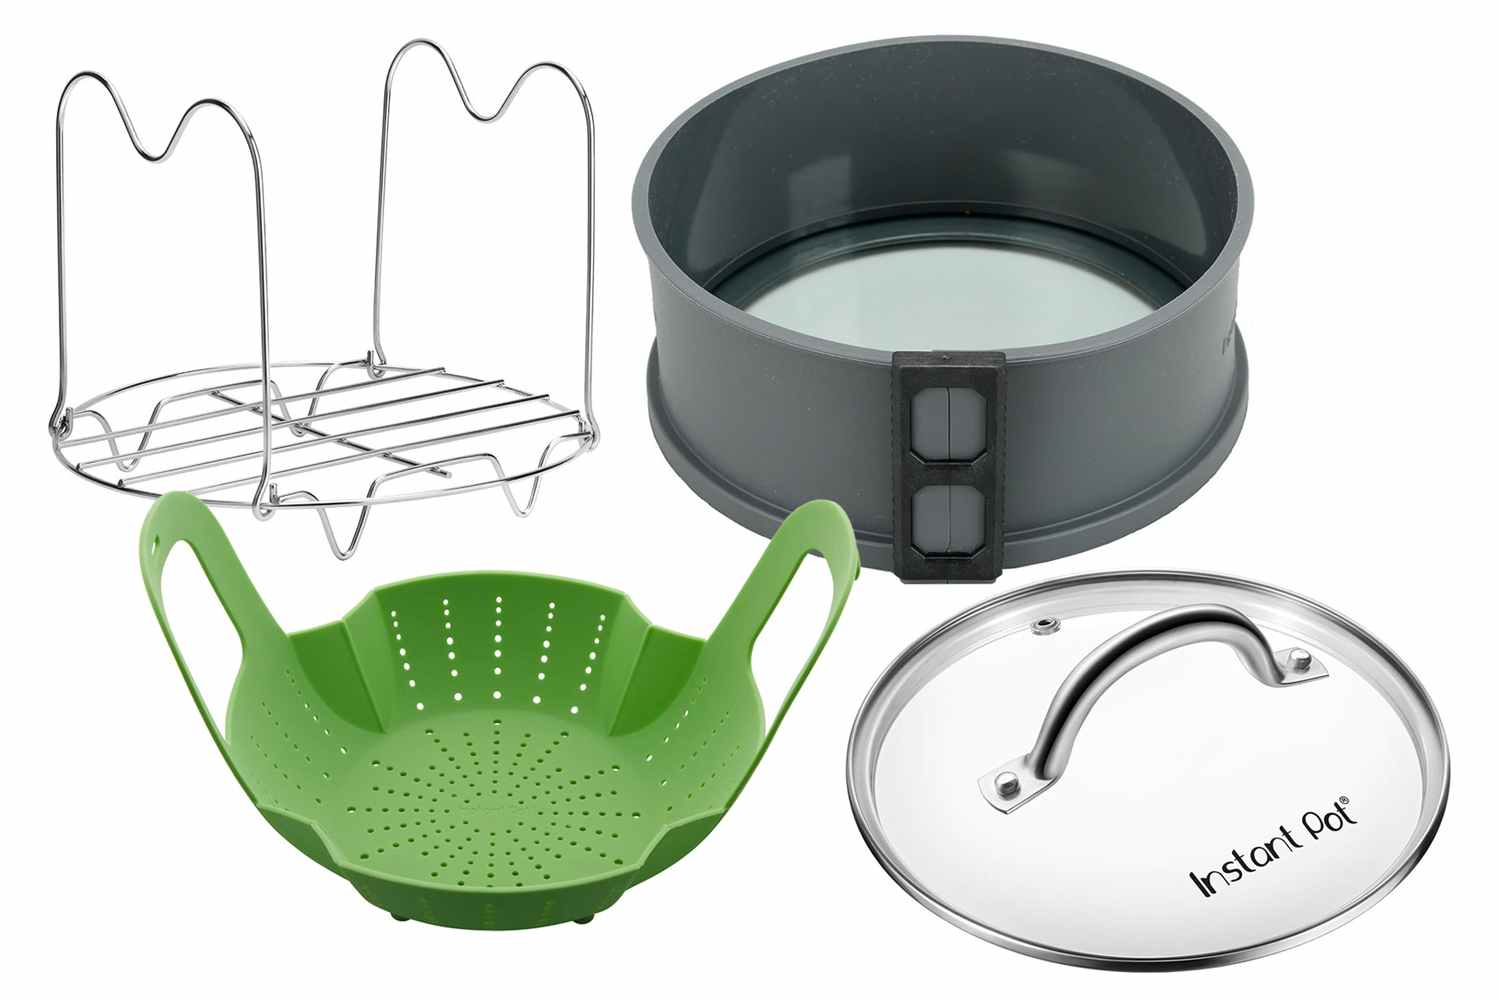 instant pot steam rack, cake pan, steamer basket, and lid accessories